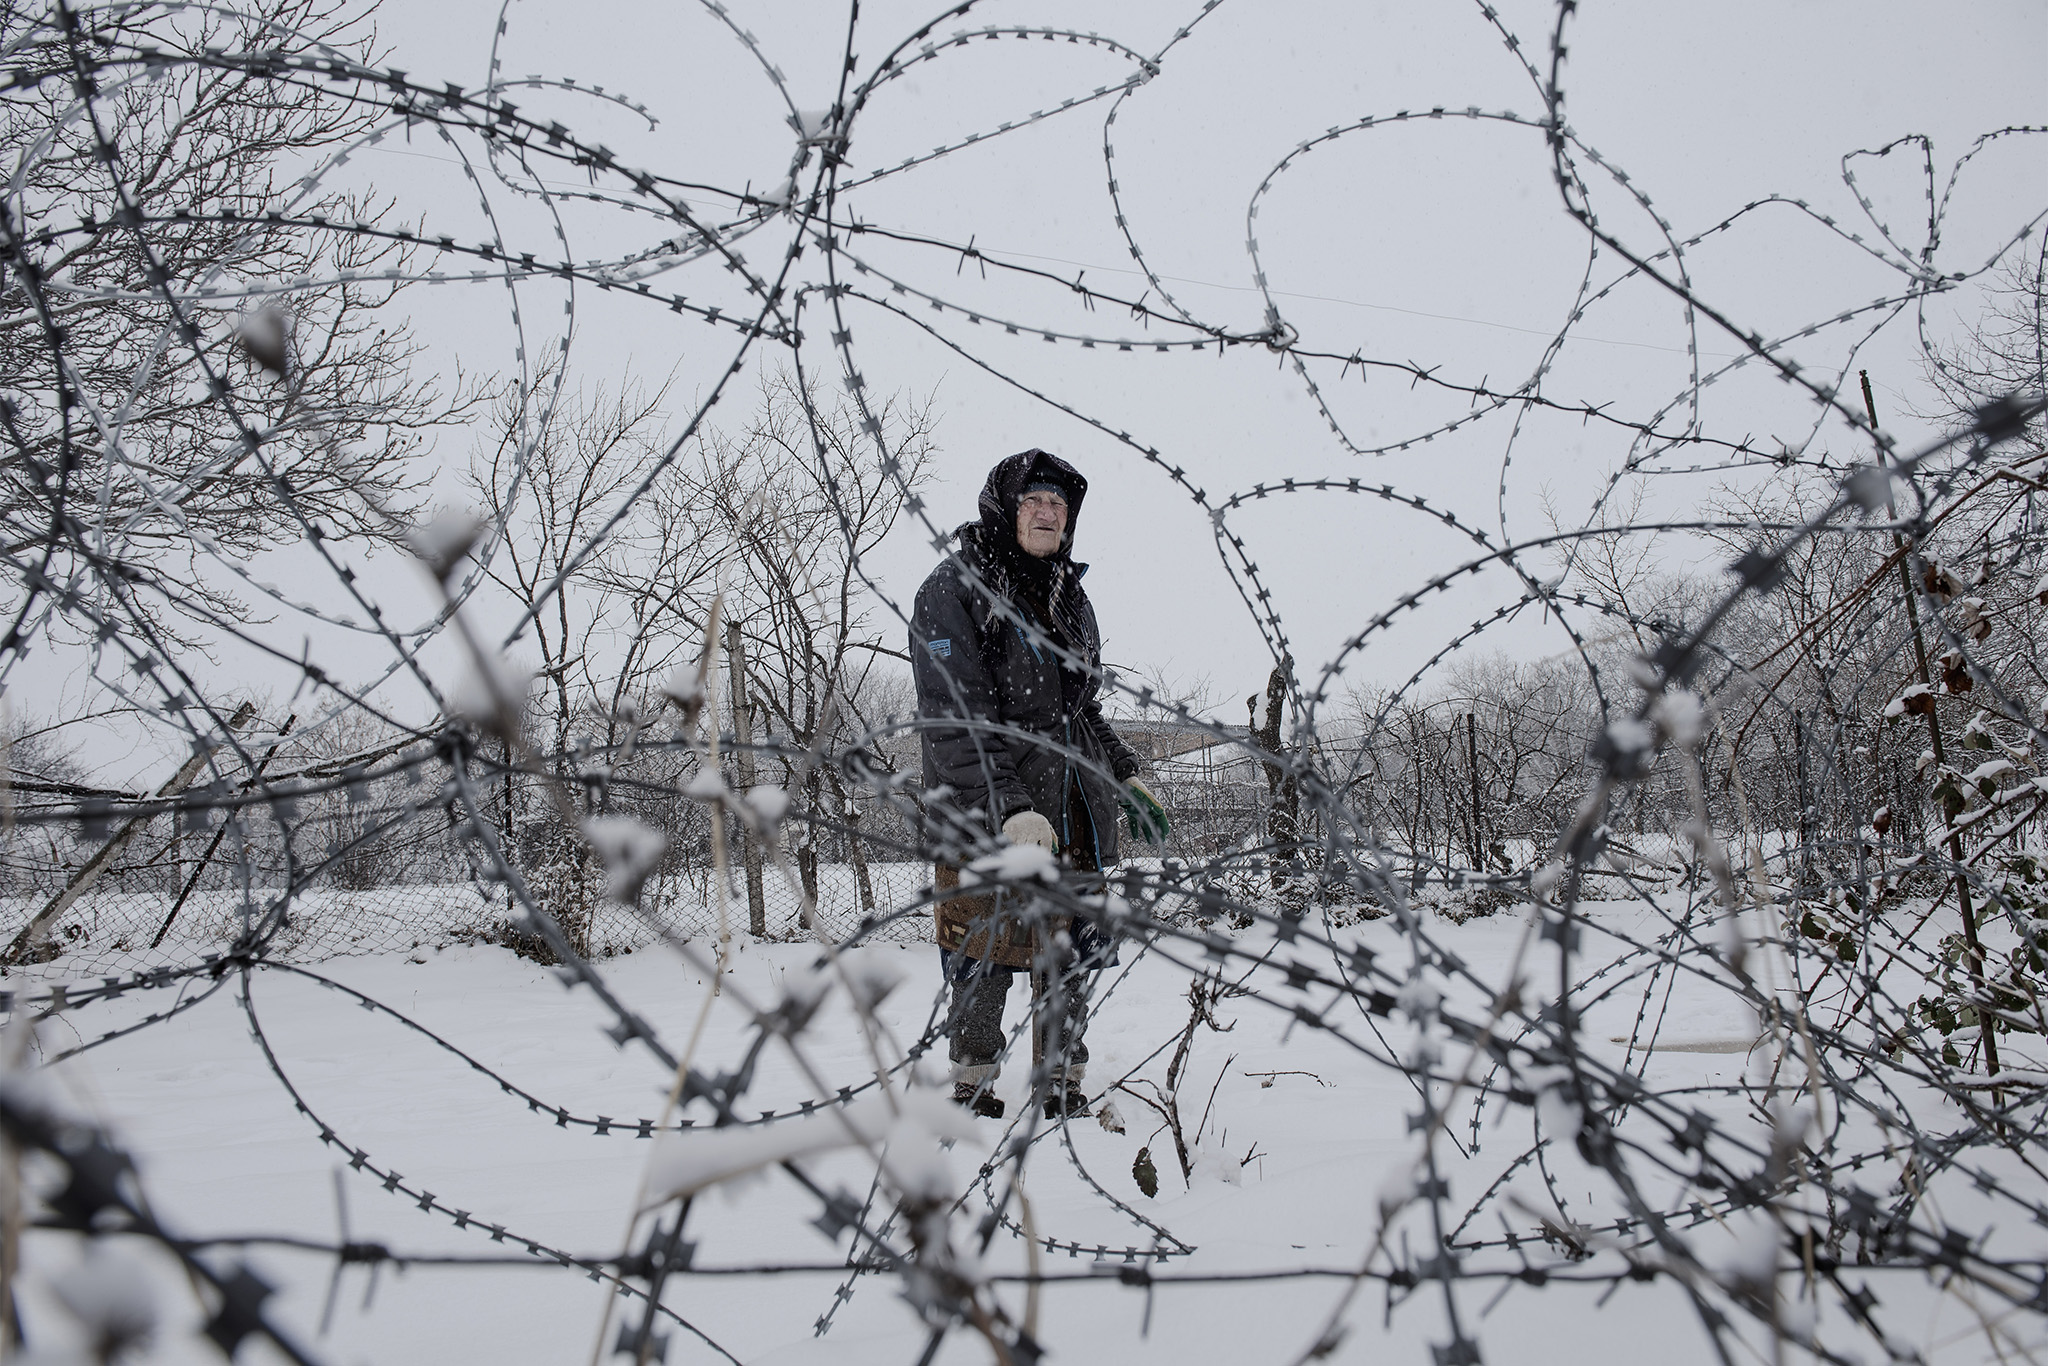 Valya Vanishvili, 85, whose home has been separated from the rest of the village by a Russian fence, in Khurvaleti, Georgia, on March 13, 2022. Russia invaded Georgia in 2008. (Laetitia Vancon/The New York Times)